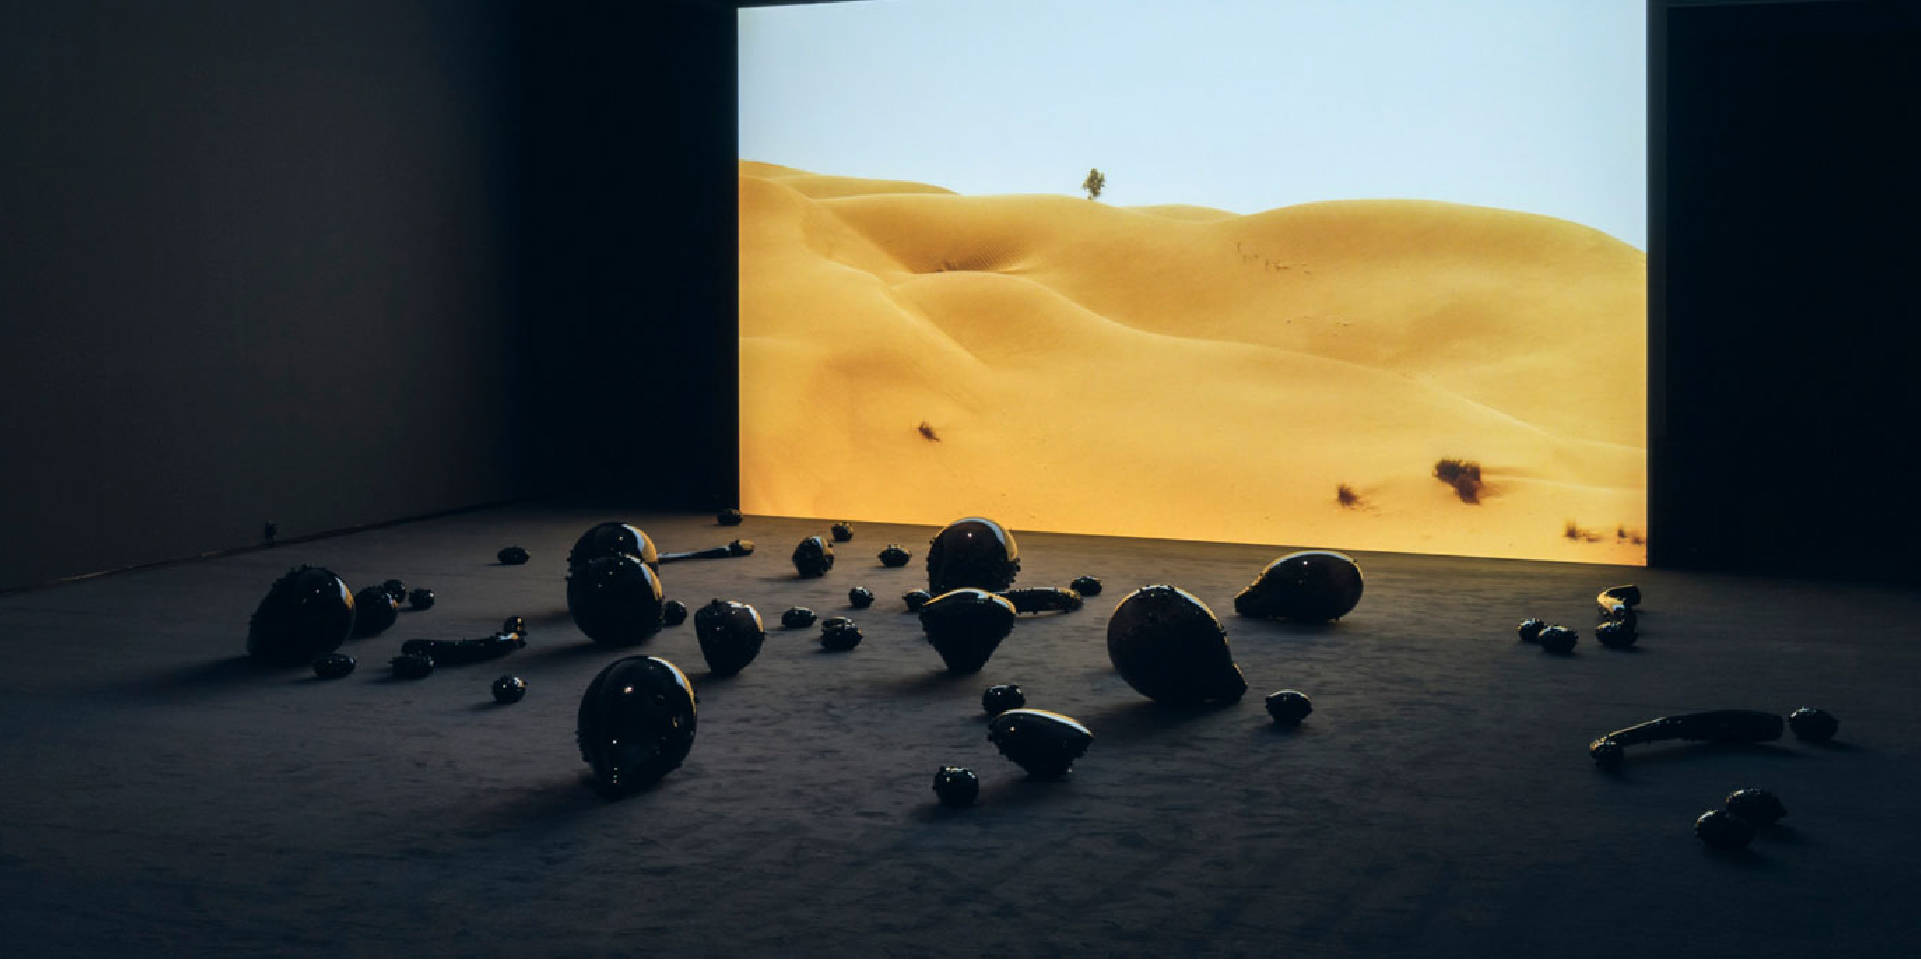 A dark room with rounded, shiny, black sculptures arranged on the floor in front of a projection screen showing a landscape of large yellow sand dunes and blue sky.